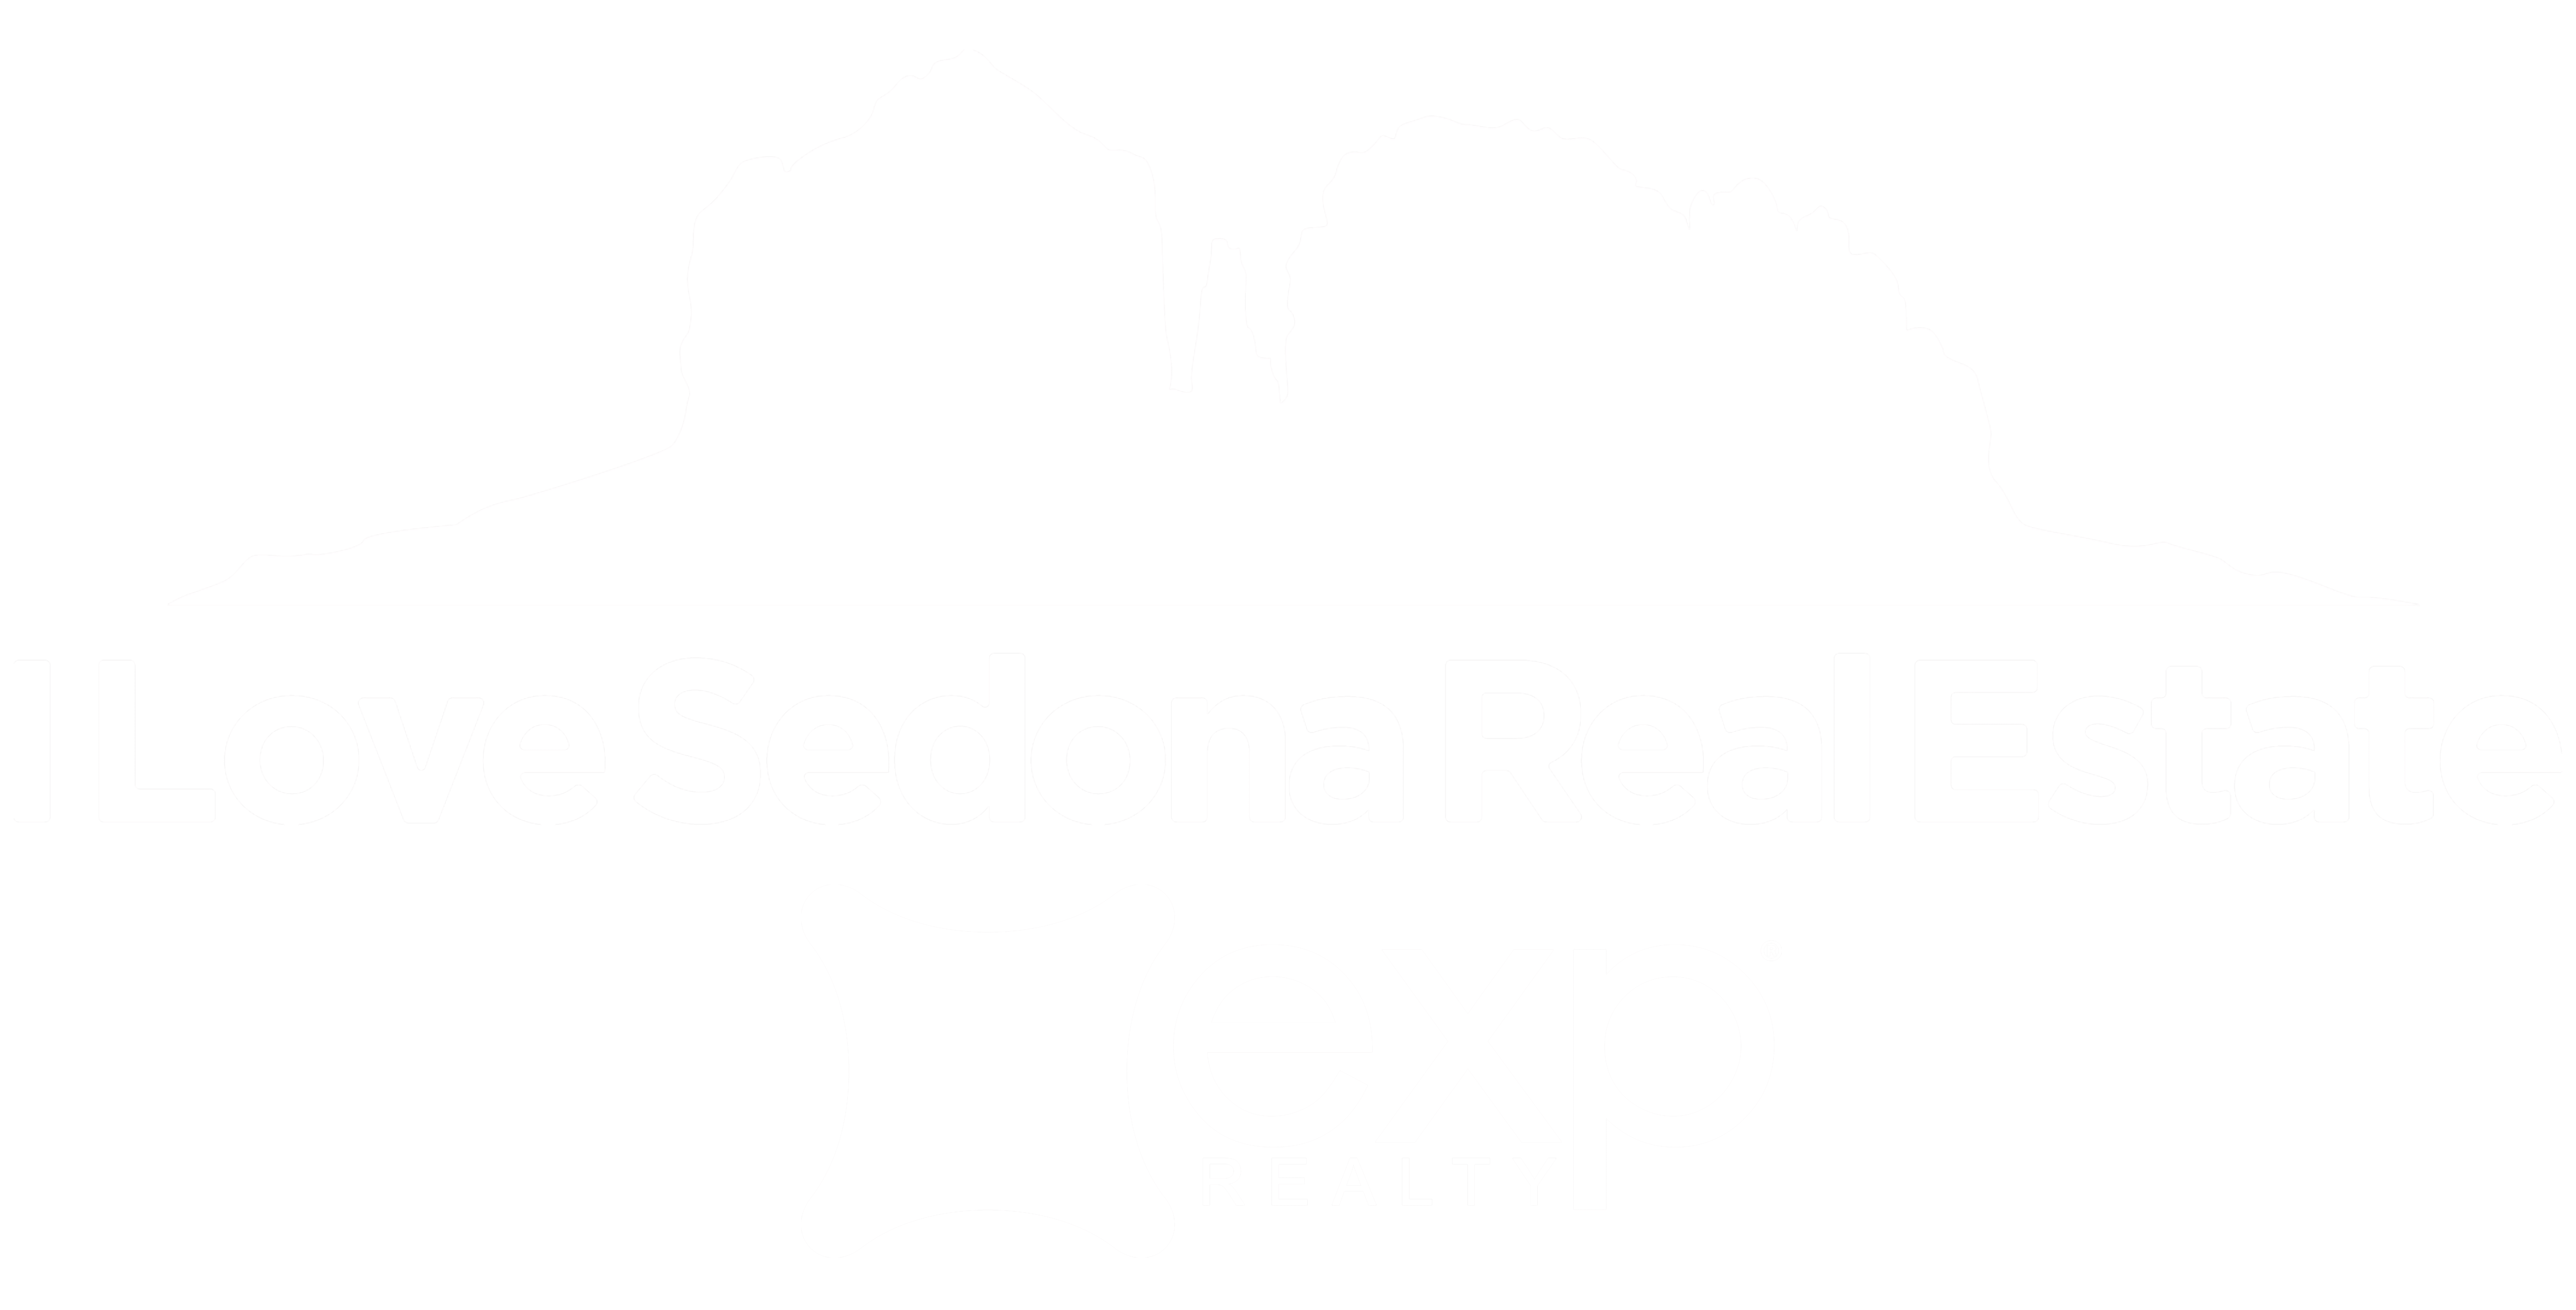 Your Premier Team – eXp Realty